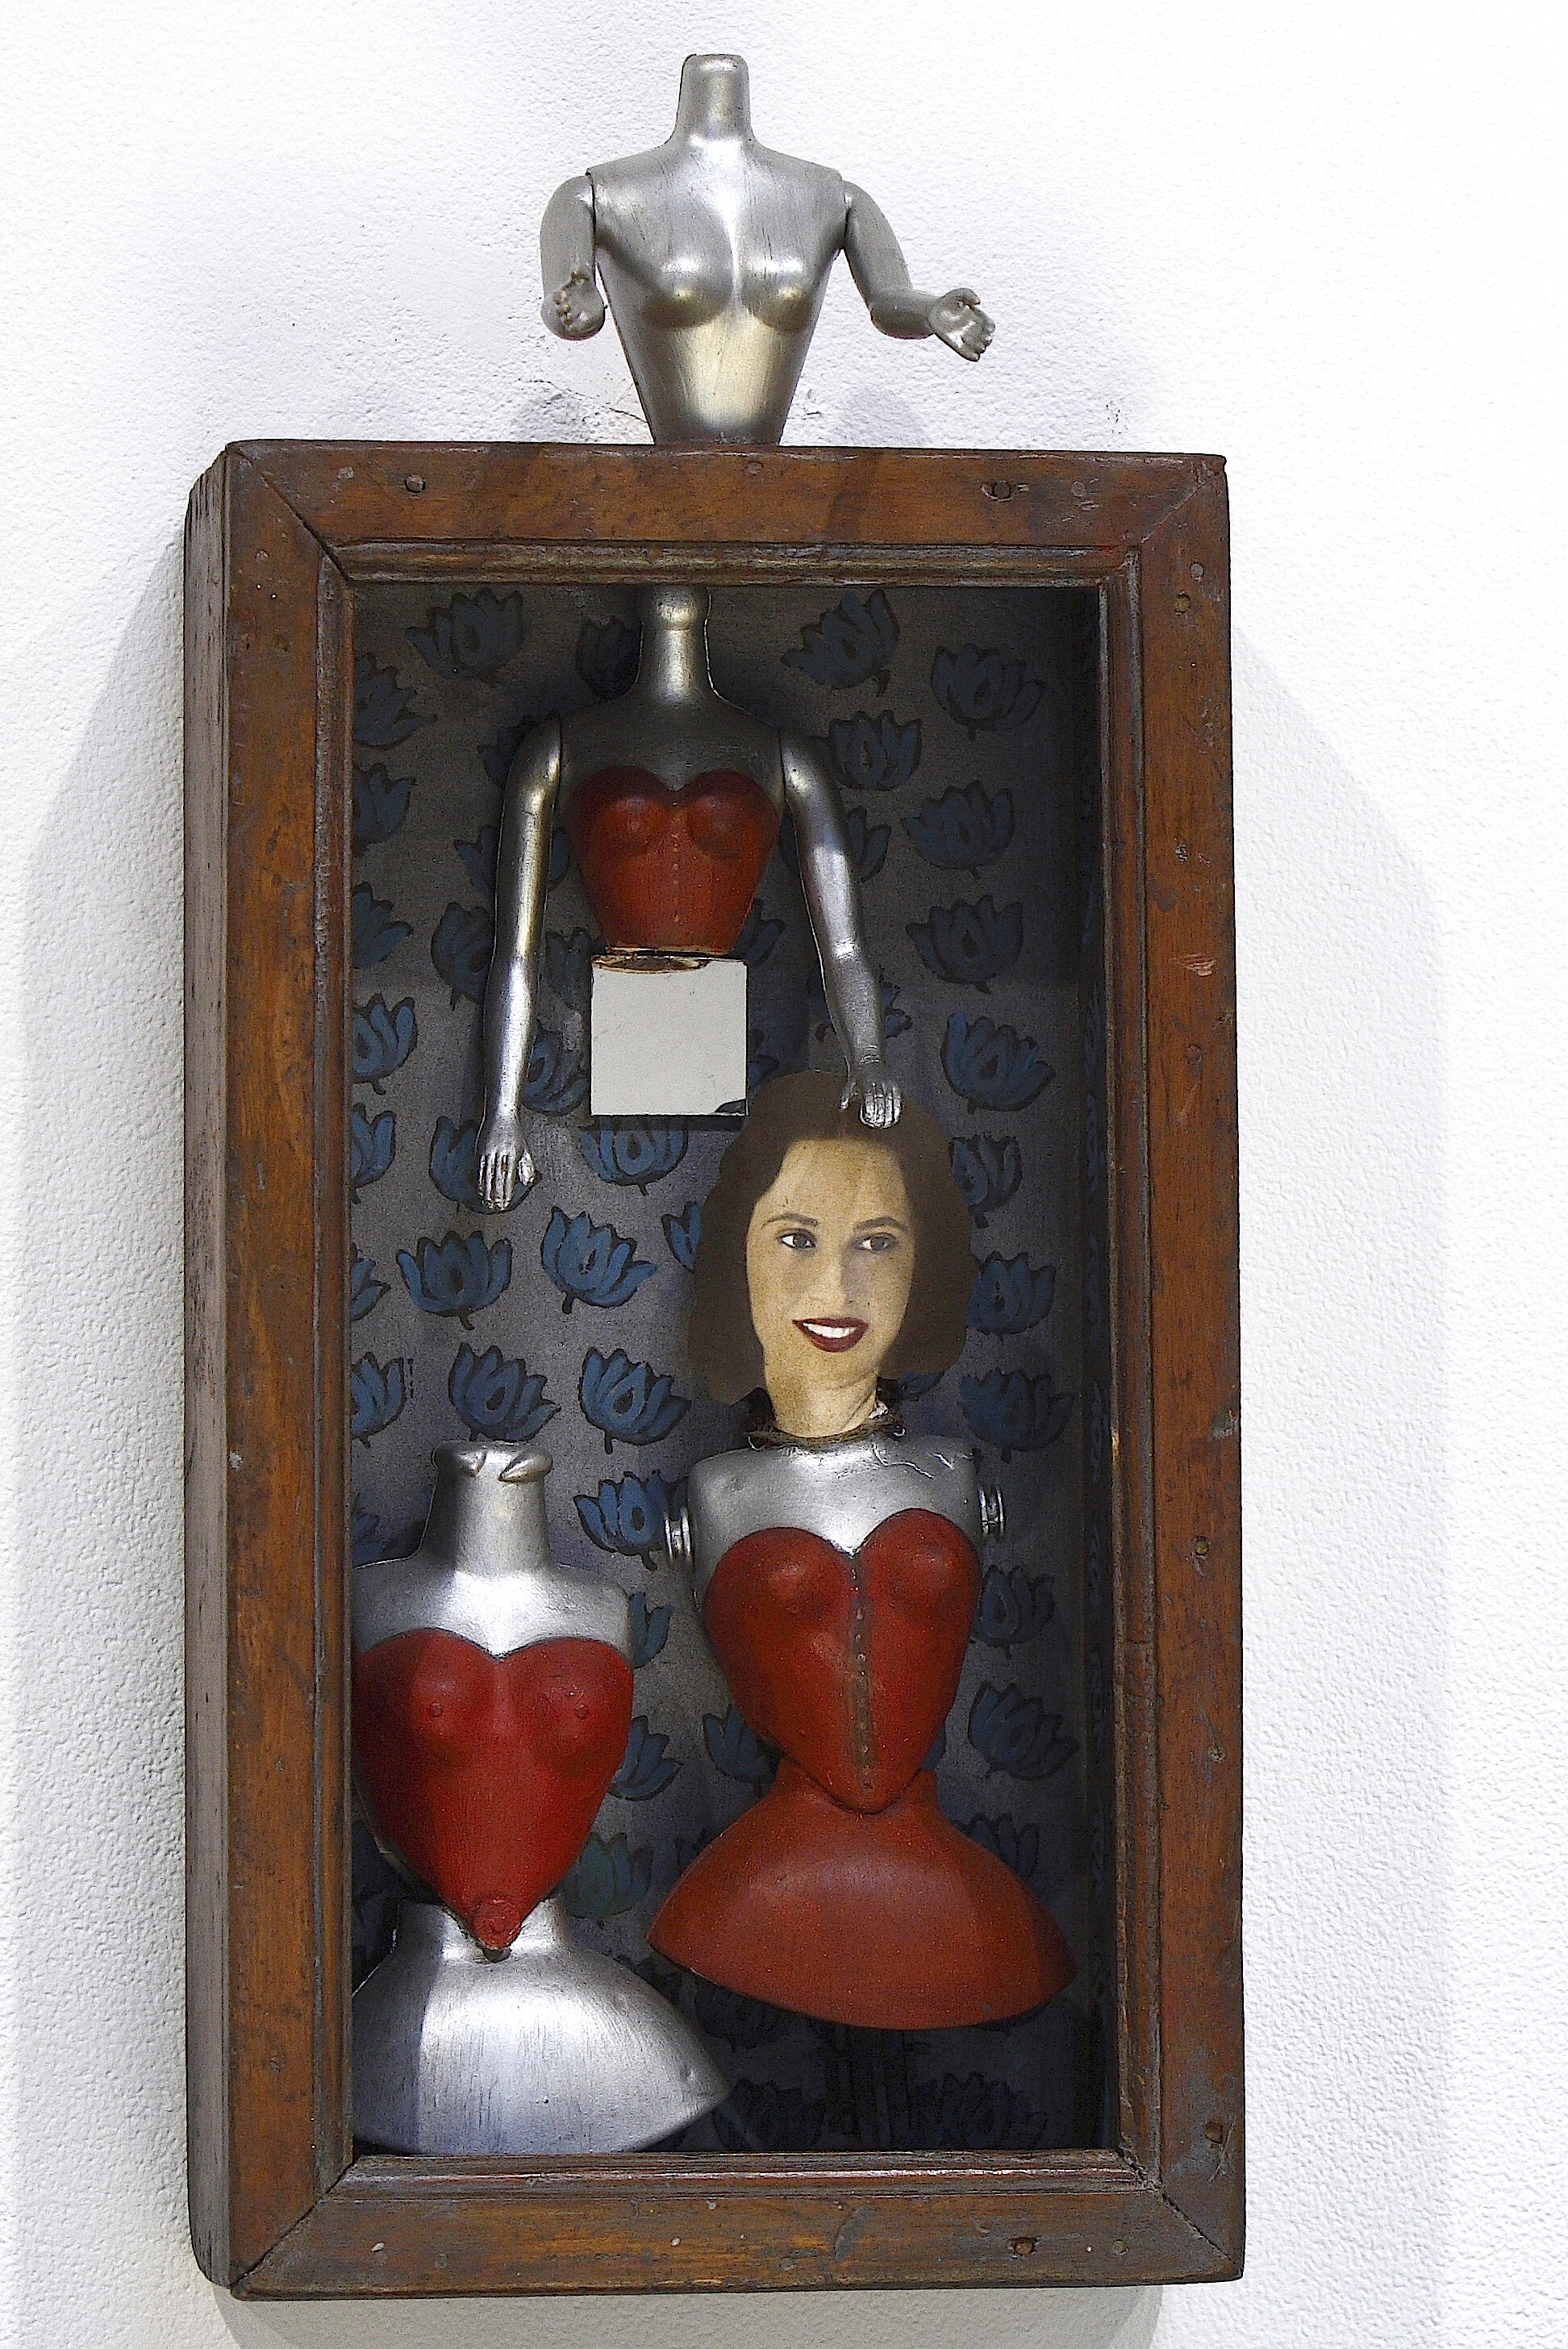  My Mother’s Dollhouse, 2006, assemblage of recycled plastic dolls, mother’s photo, found wooden box, 32 x 16 x 10 cm 